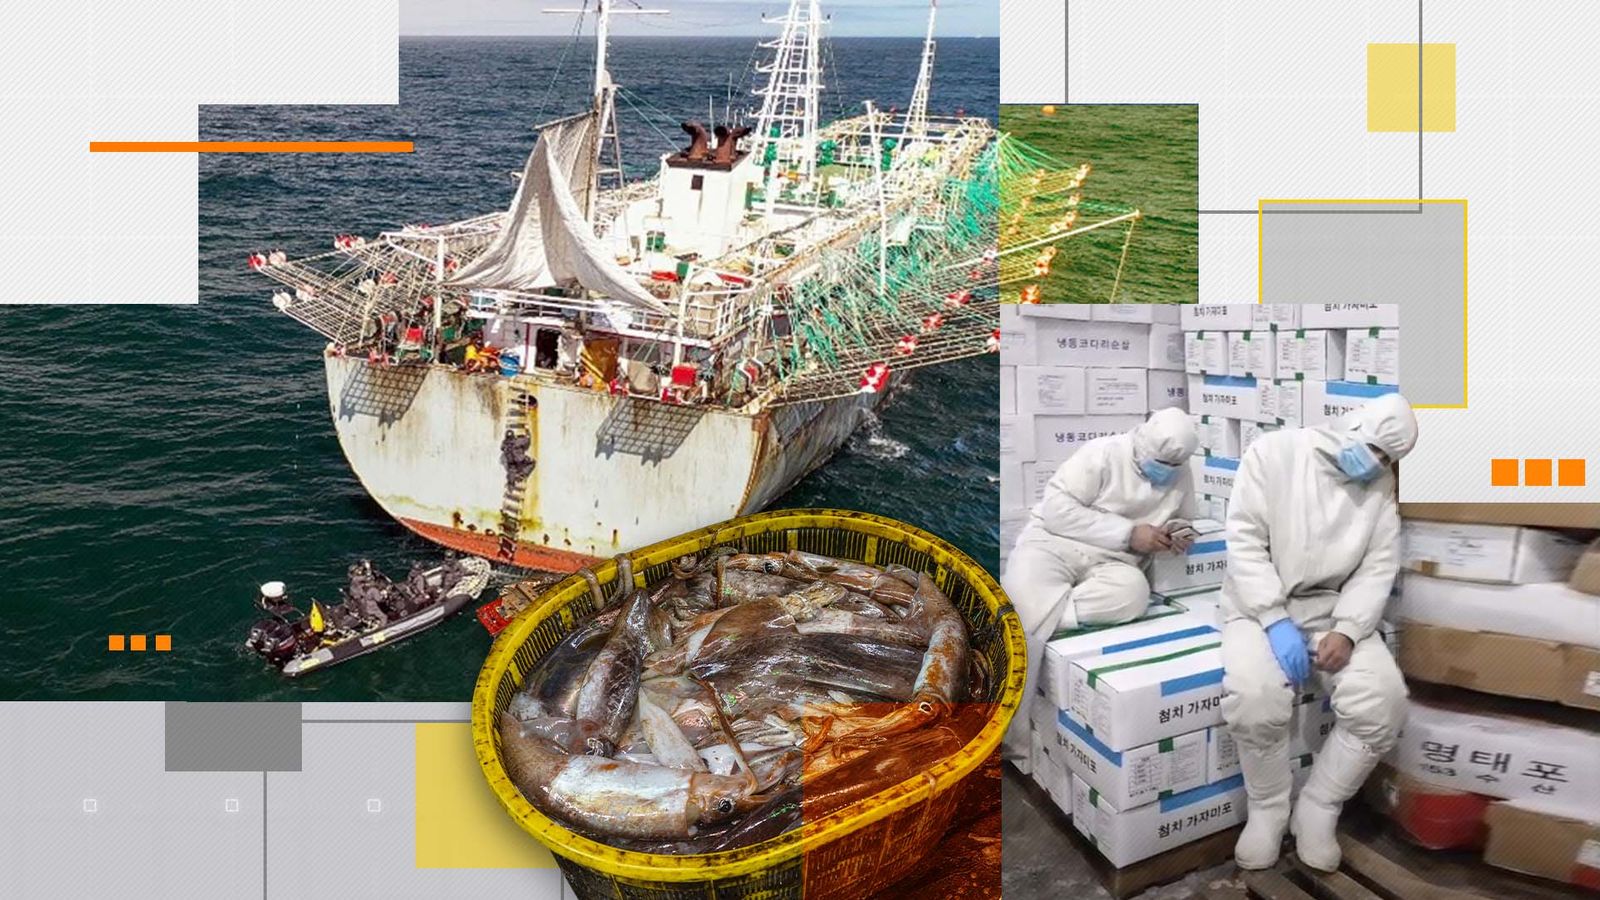 Seafood sold in UK supermarkets may have a dark side - here's why